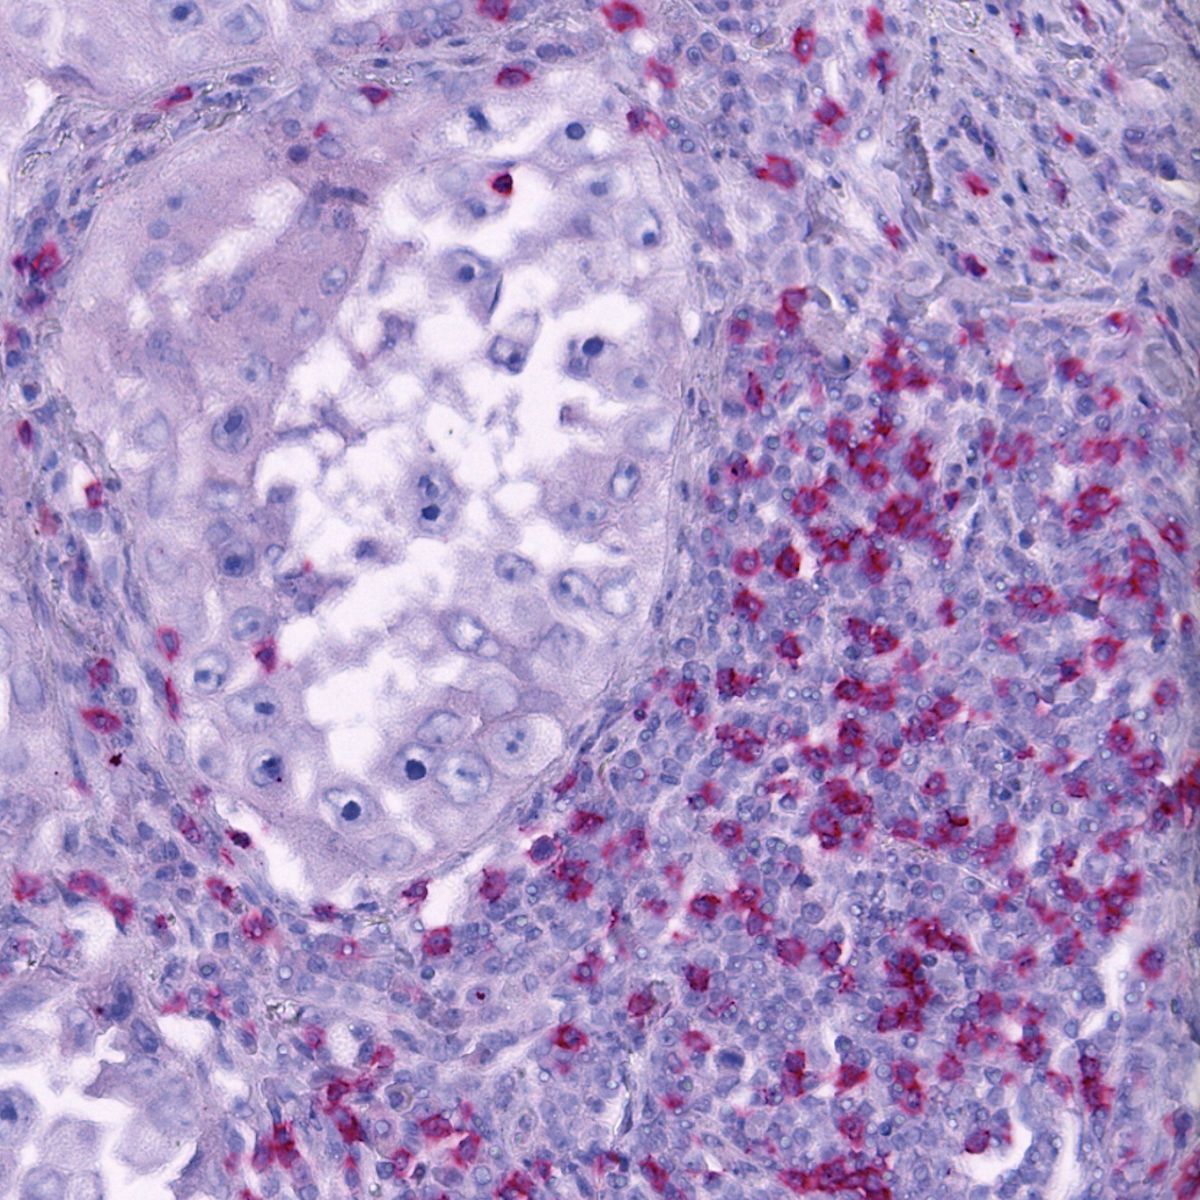 Lung adenocarcinoma stained with anti-CD8 antibody labeled and detected using UTCK-AP1 Kit and Cell Palette Red AP chromogen